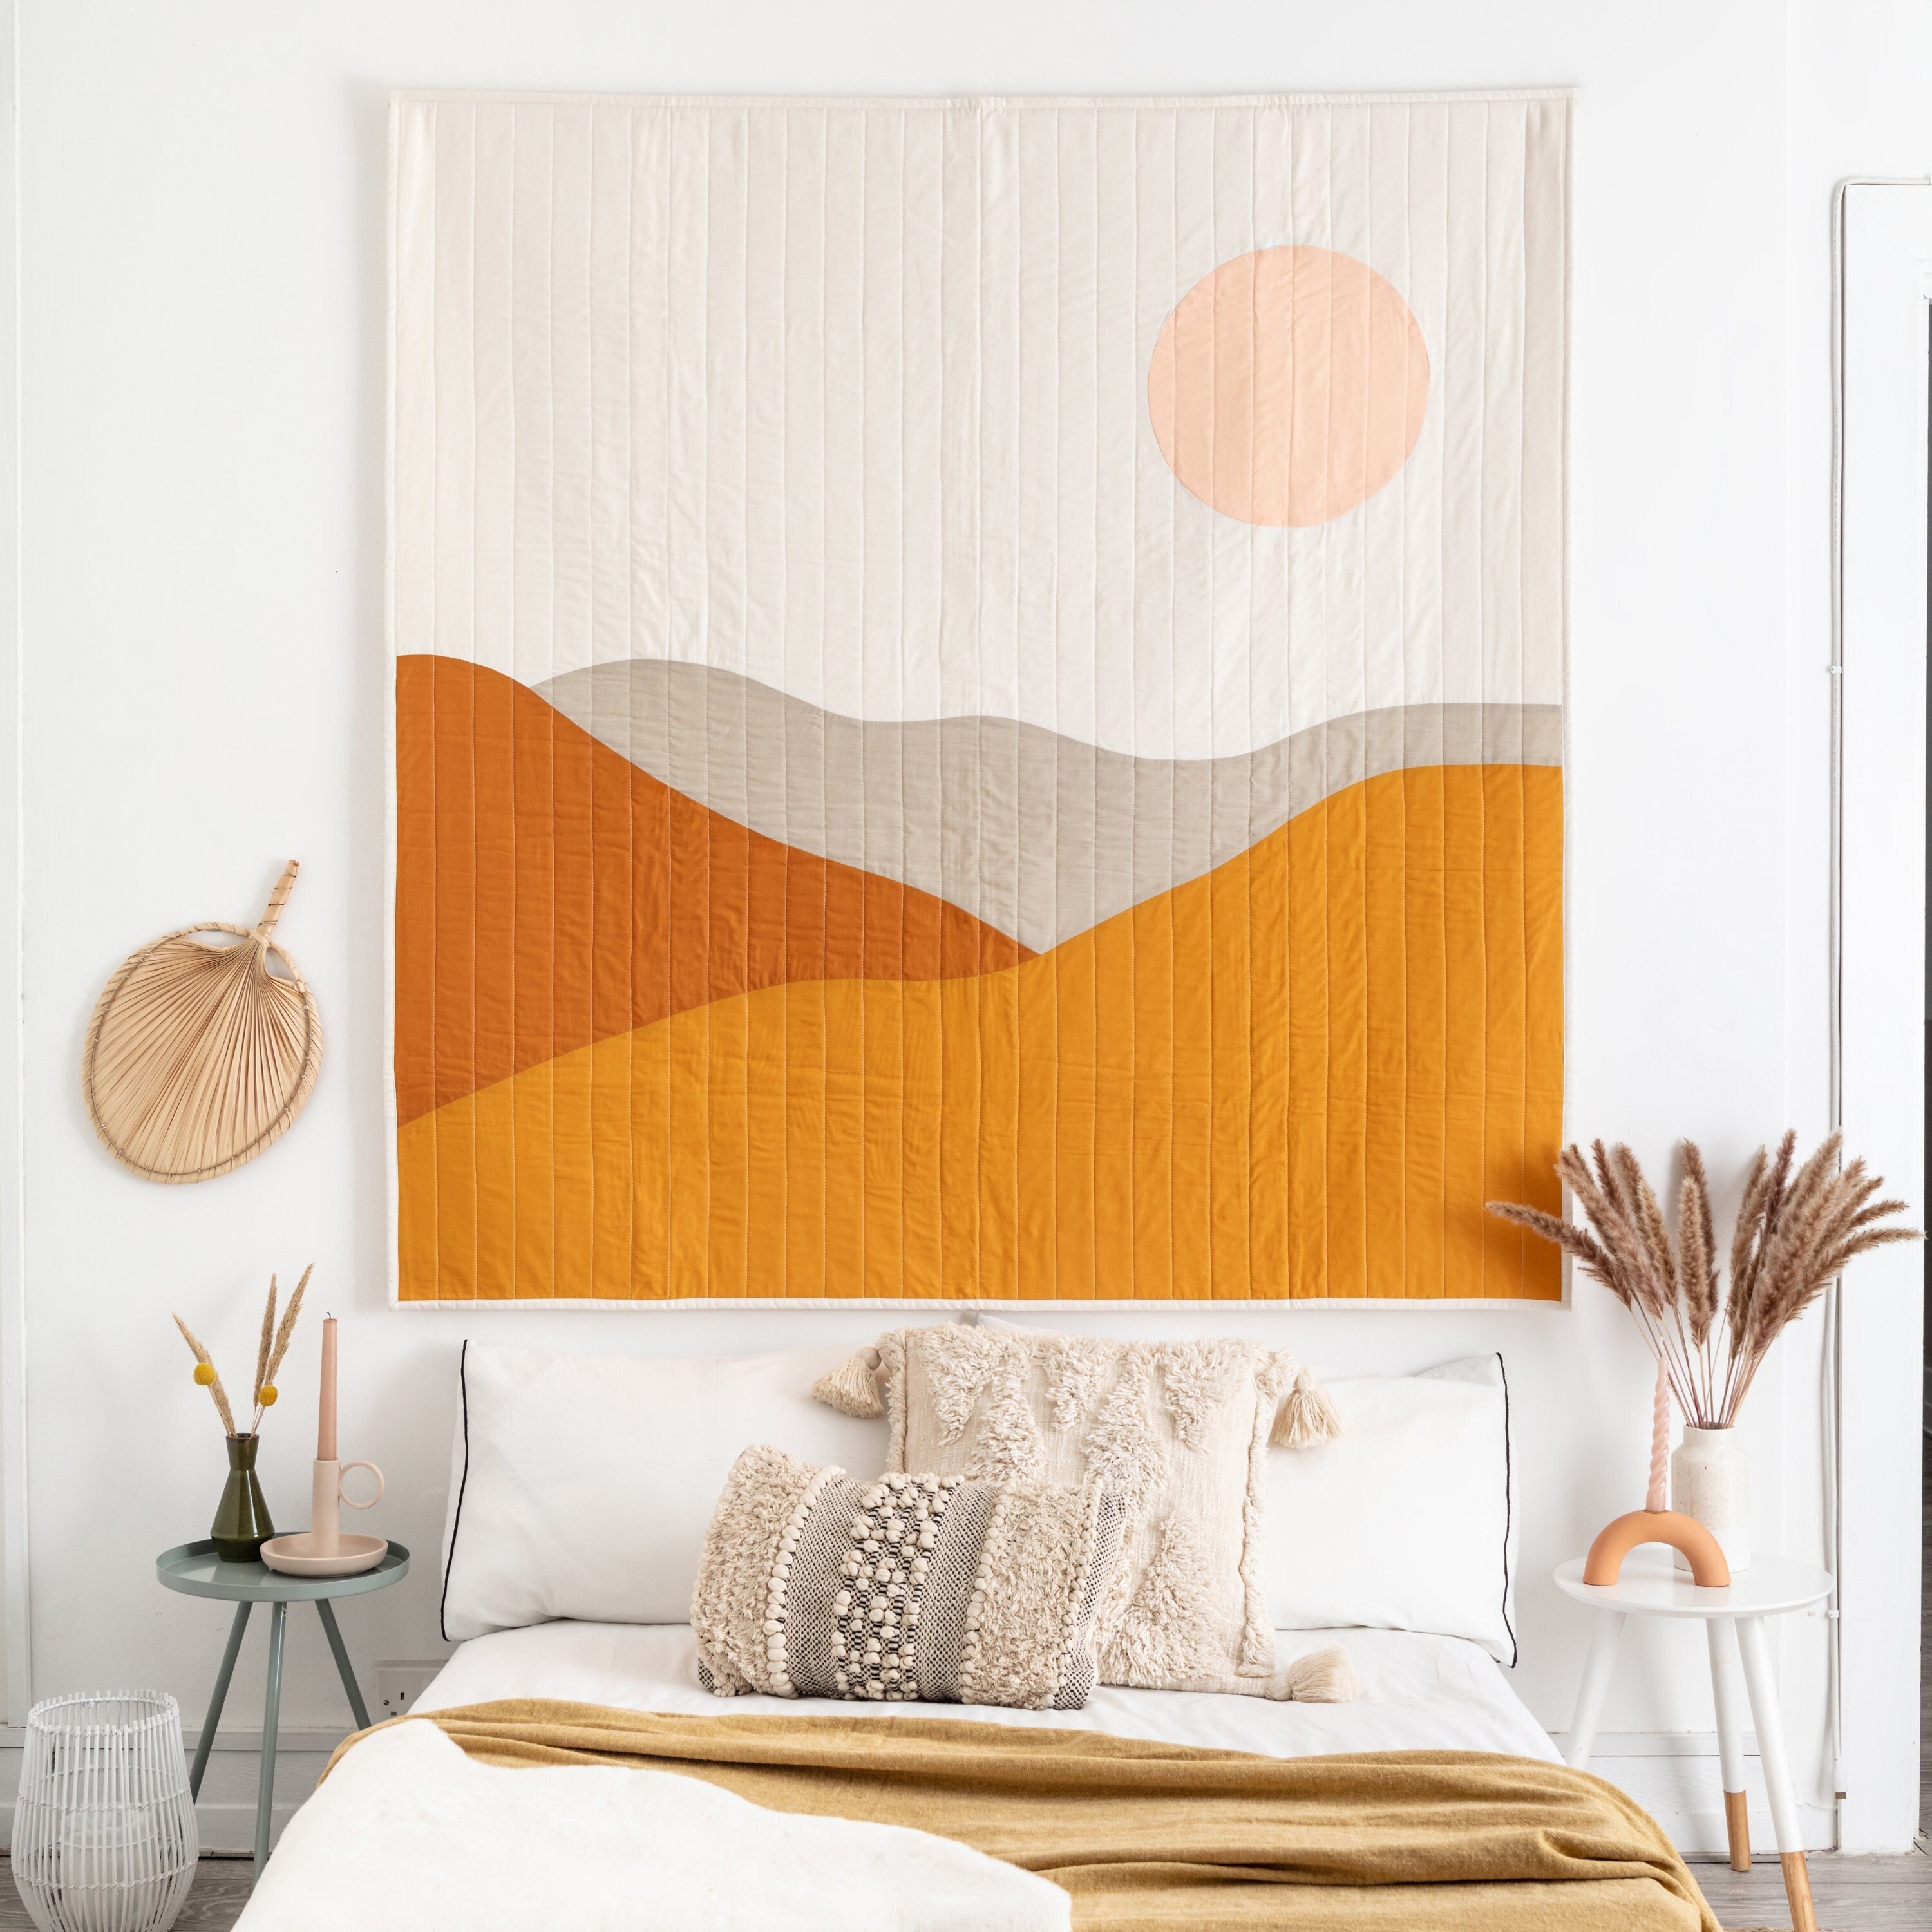 Desert Aesthetic Tapestry Fabric Wall Hanging Over Bed Wall Decor